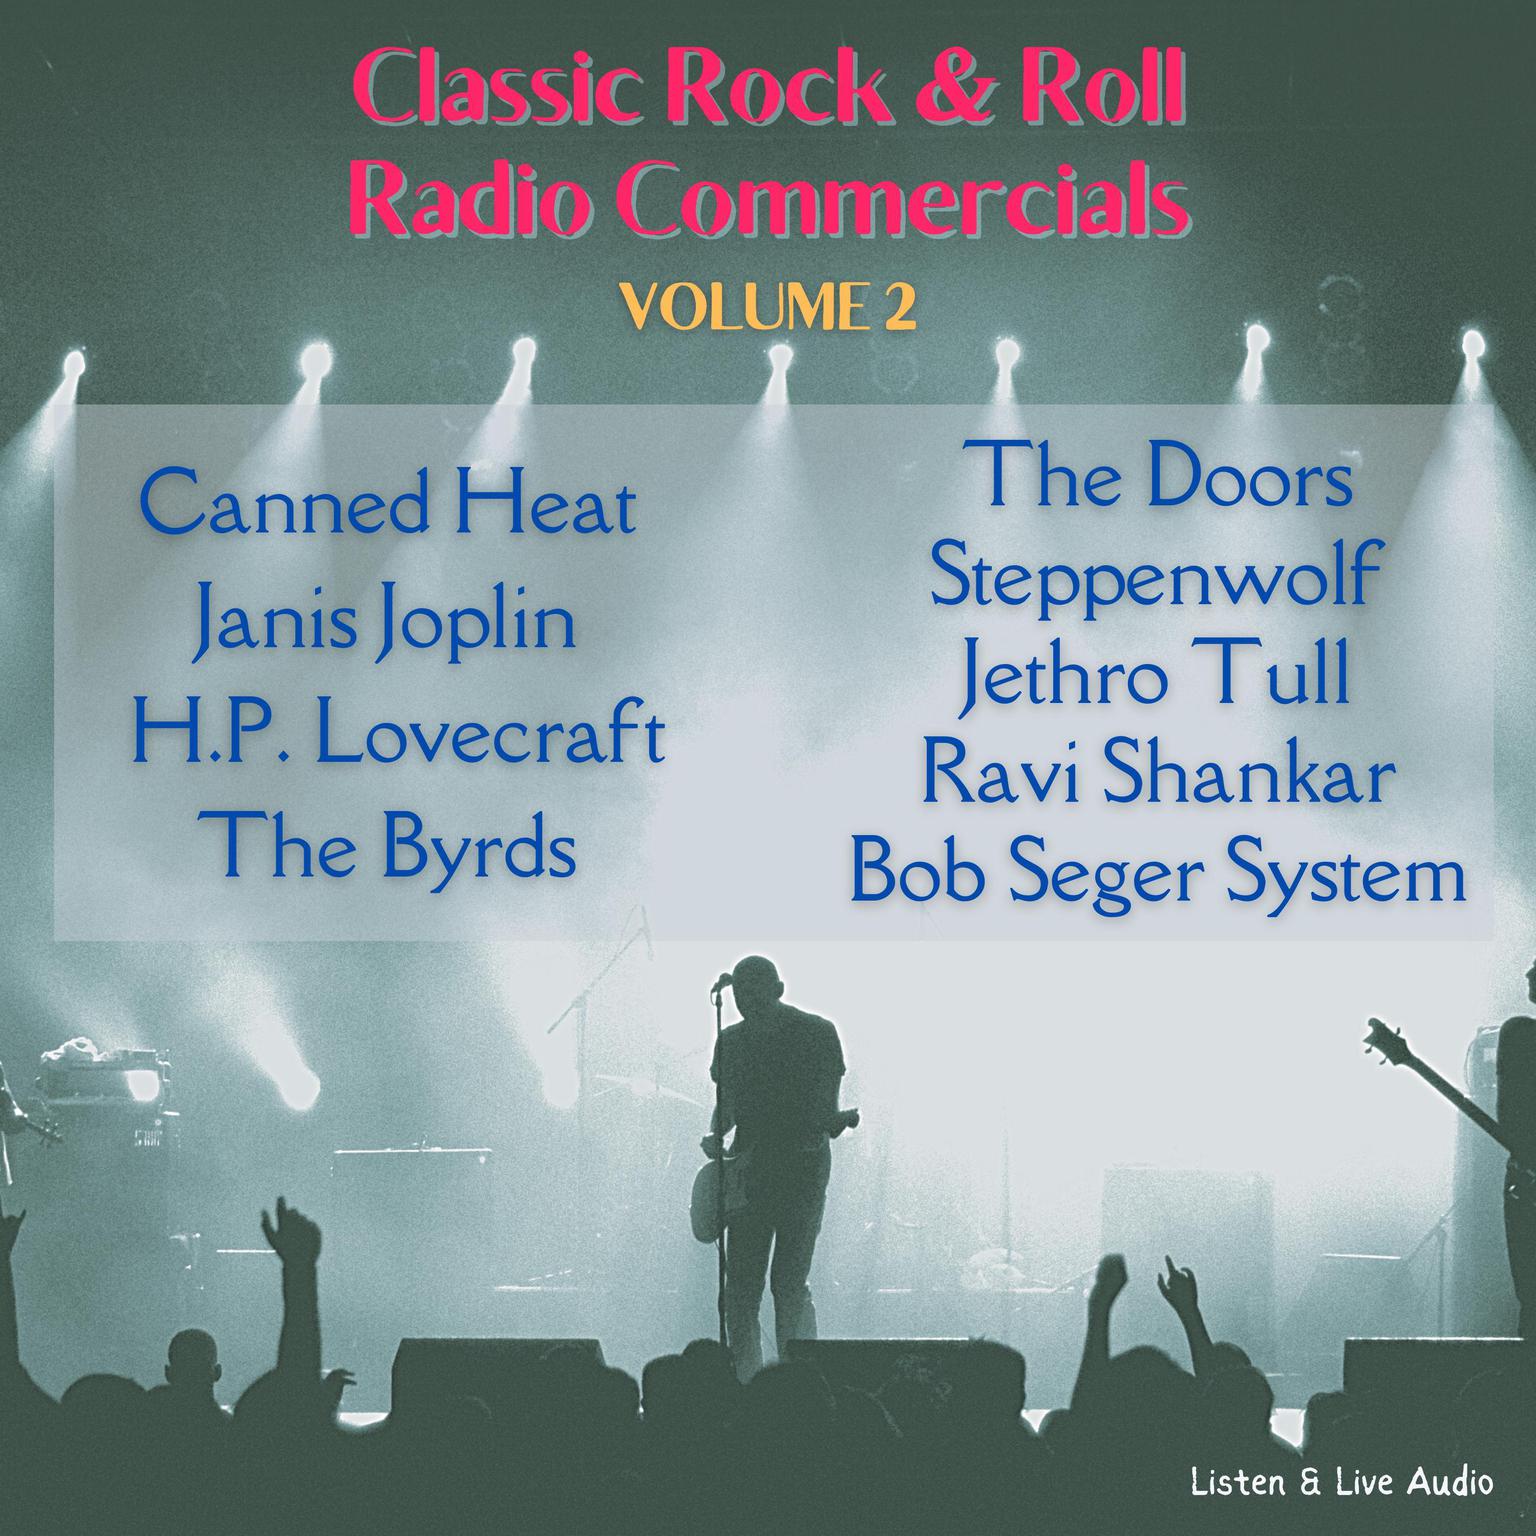 Classic Rock & Rock Radio Commercials - Volume 2 Audiobook, by H. P. Lovecraft